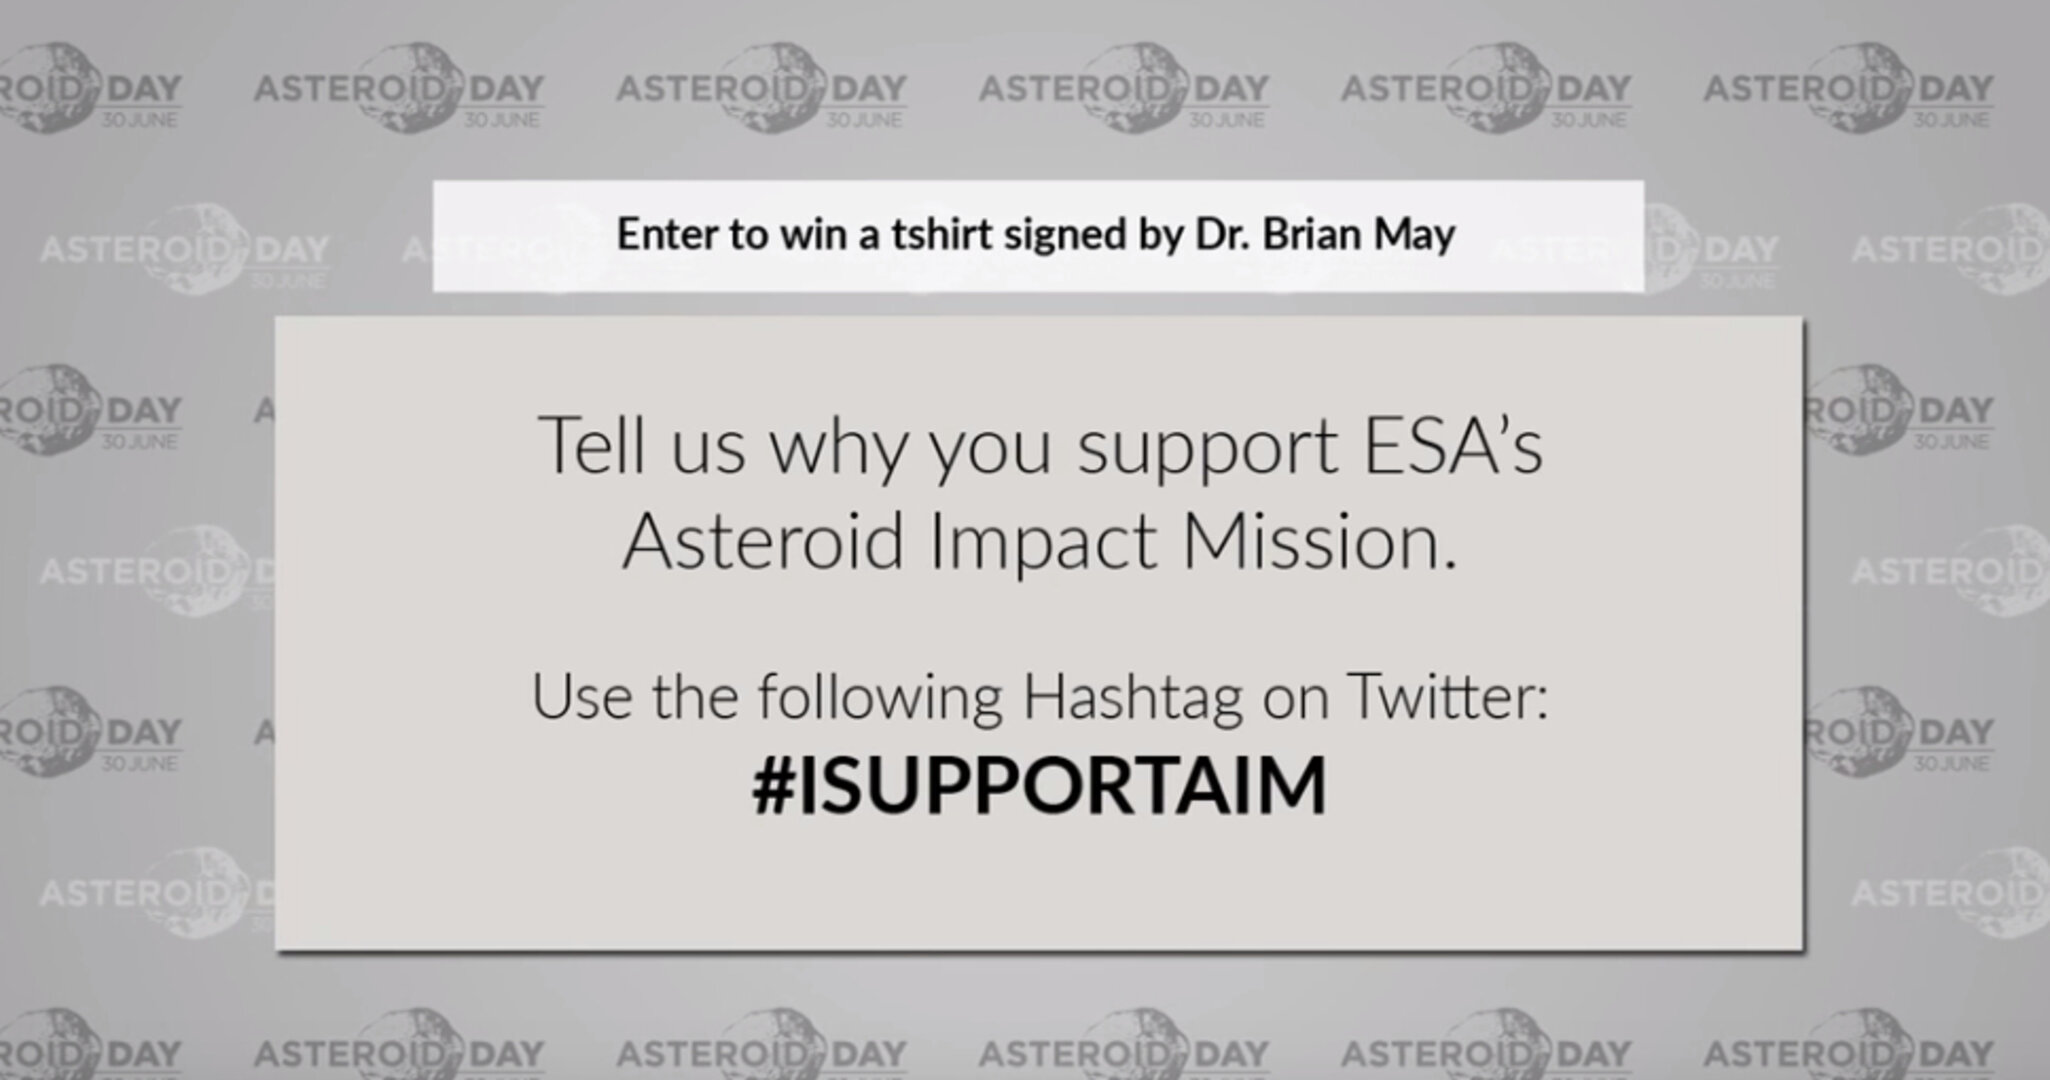 Tell us why you support AIM, using #IsupportAIM